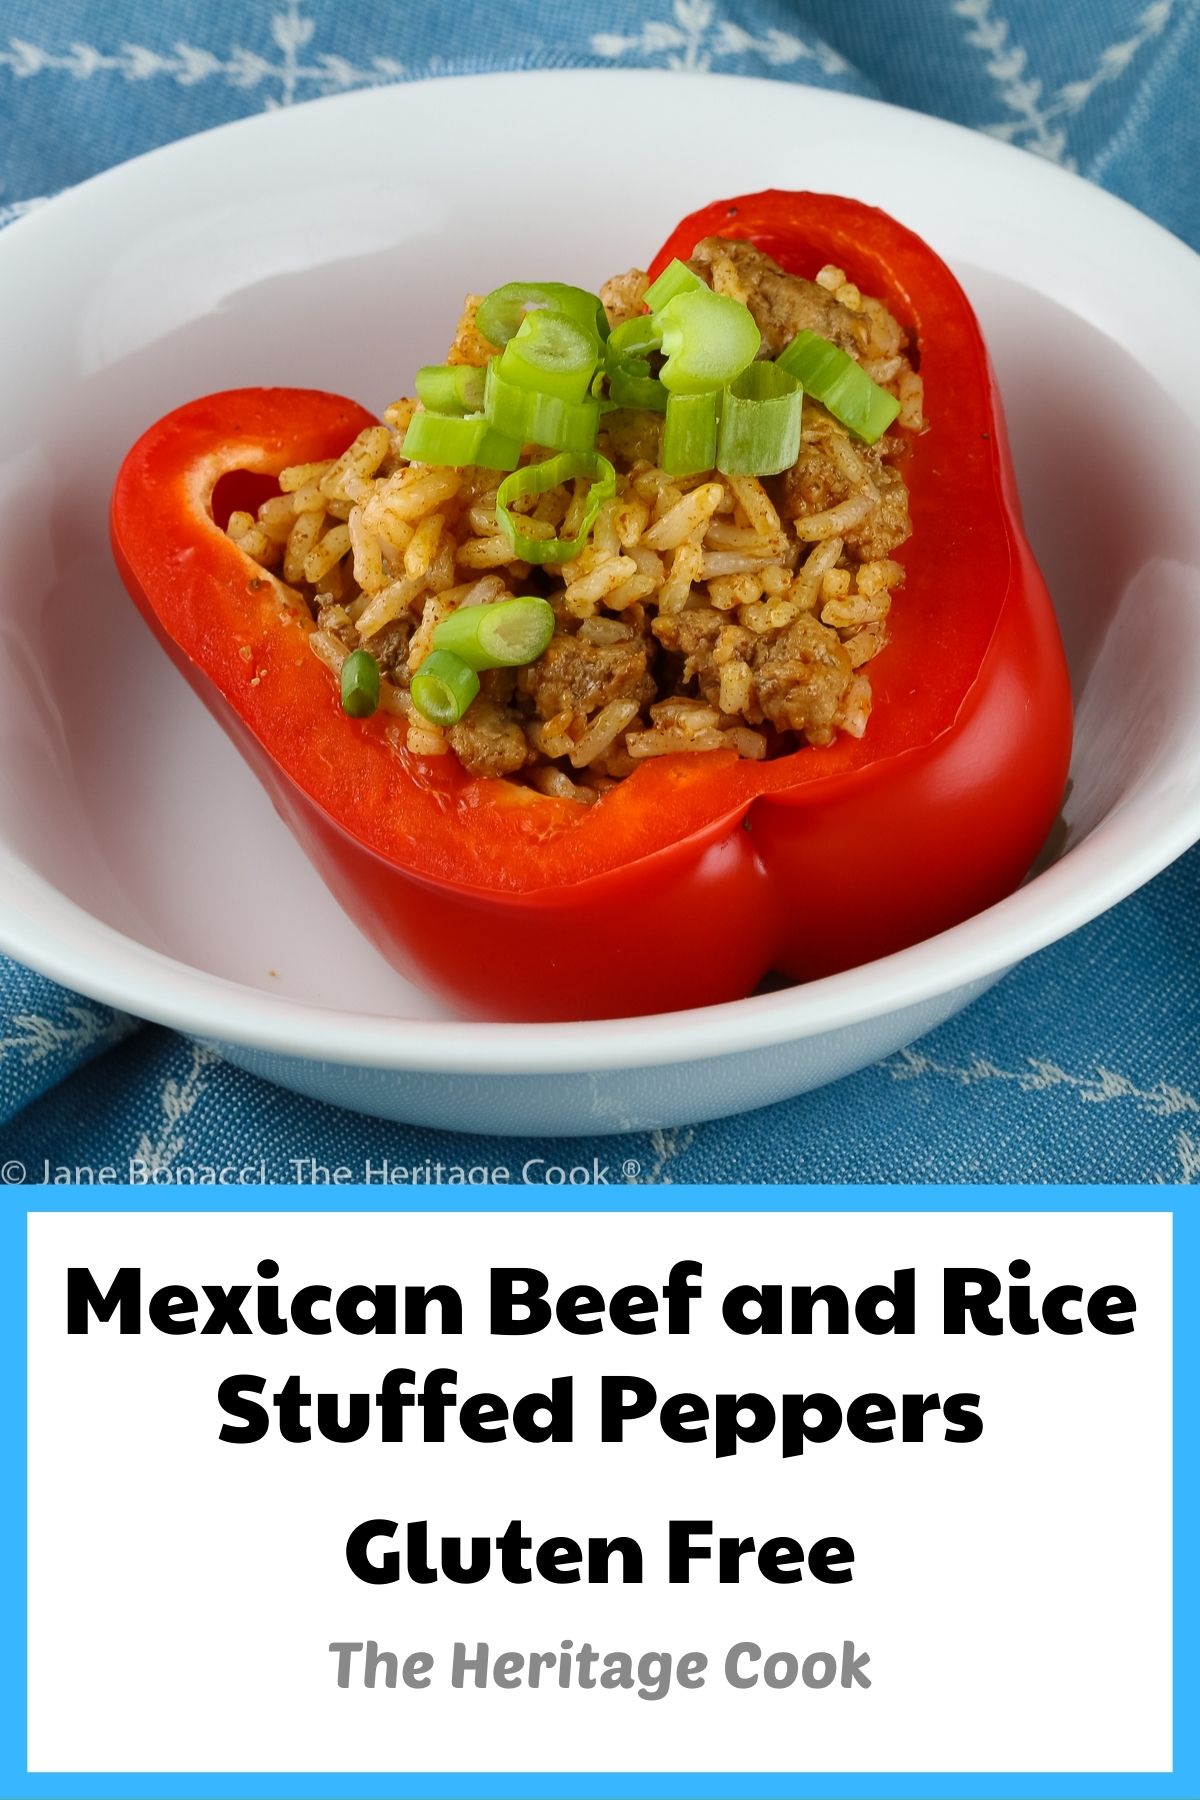 Mexican Beef and Rice Stuffed Peppers © 2022 Jane Bonacci, The Heritage Cook